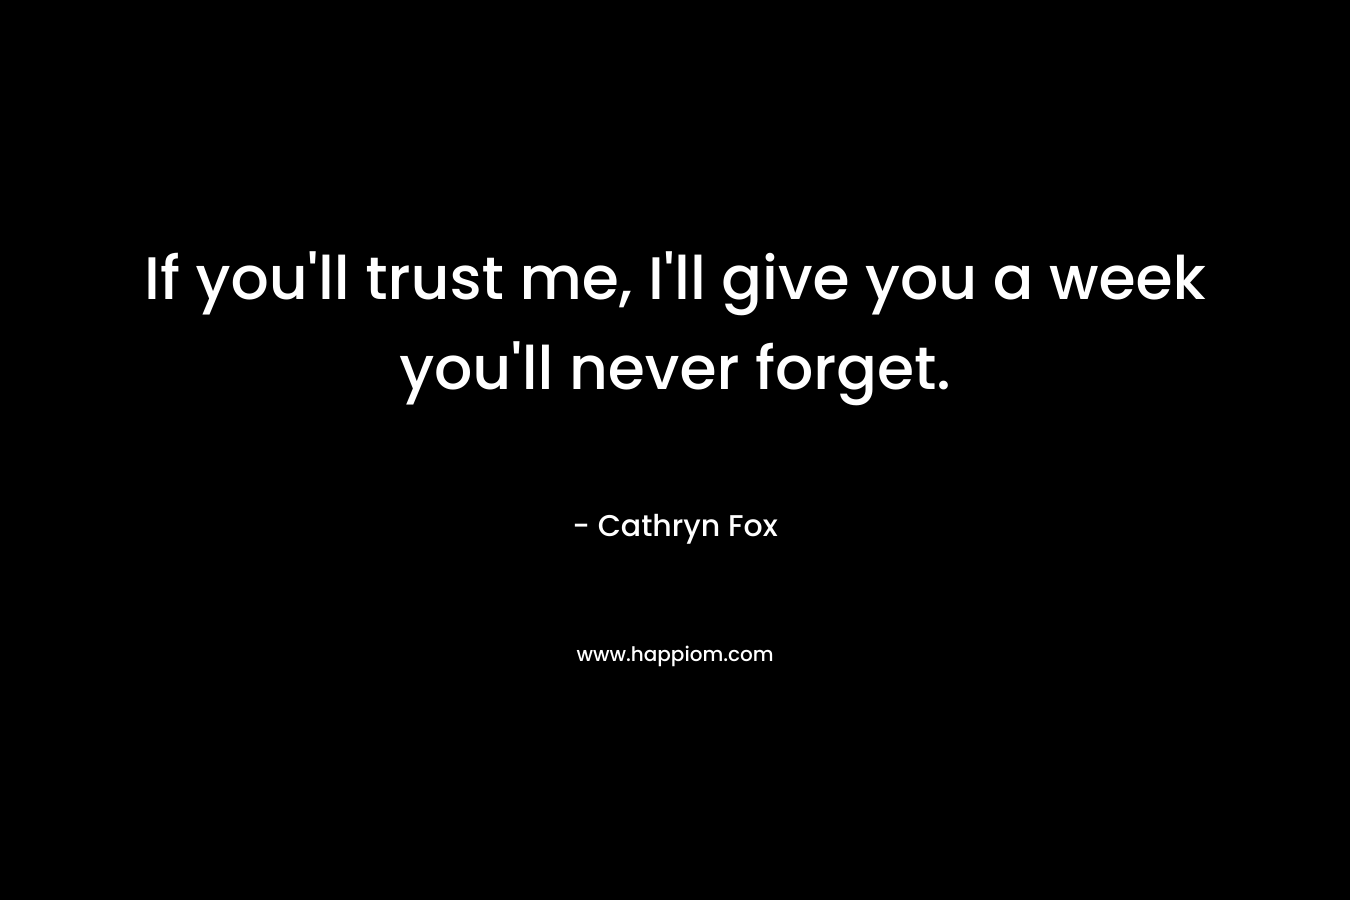 If you'll trust me, I'll give you a week you'll never forget.